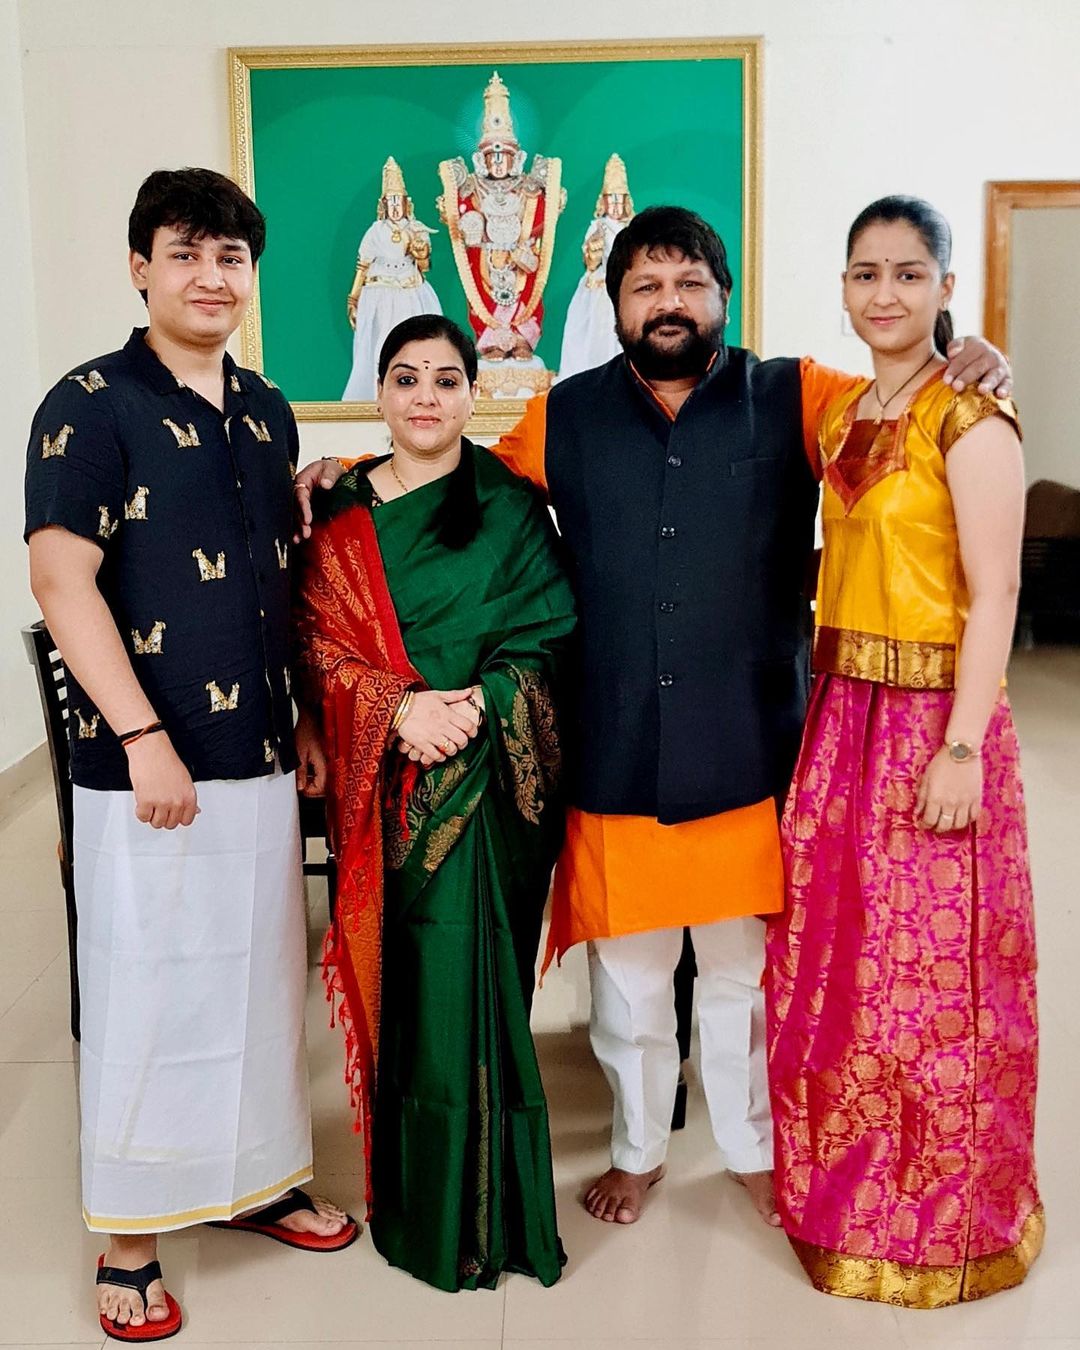 Naina Jaiswal with her family in traditional dress